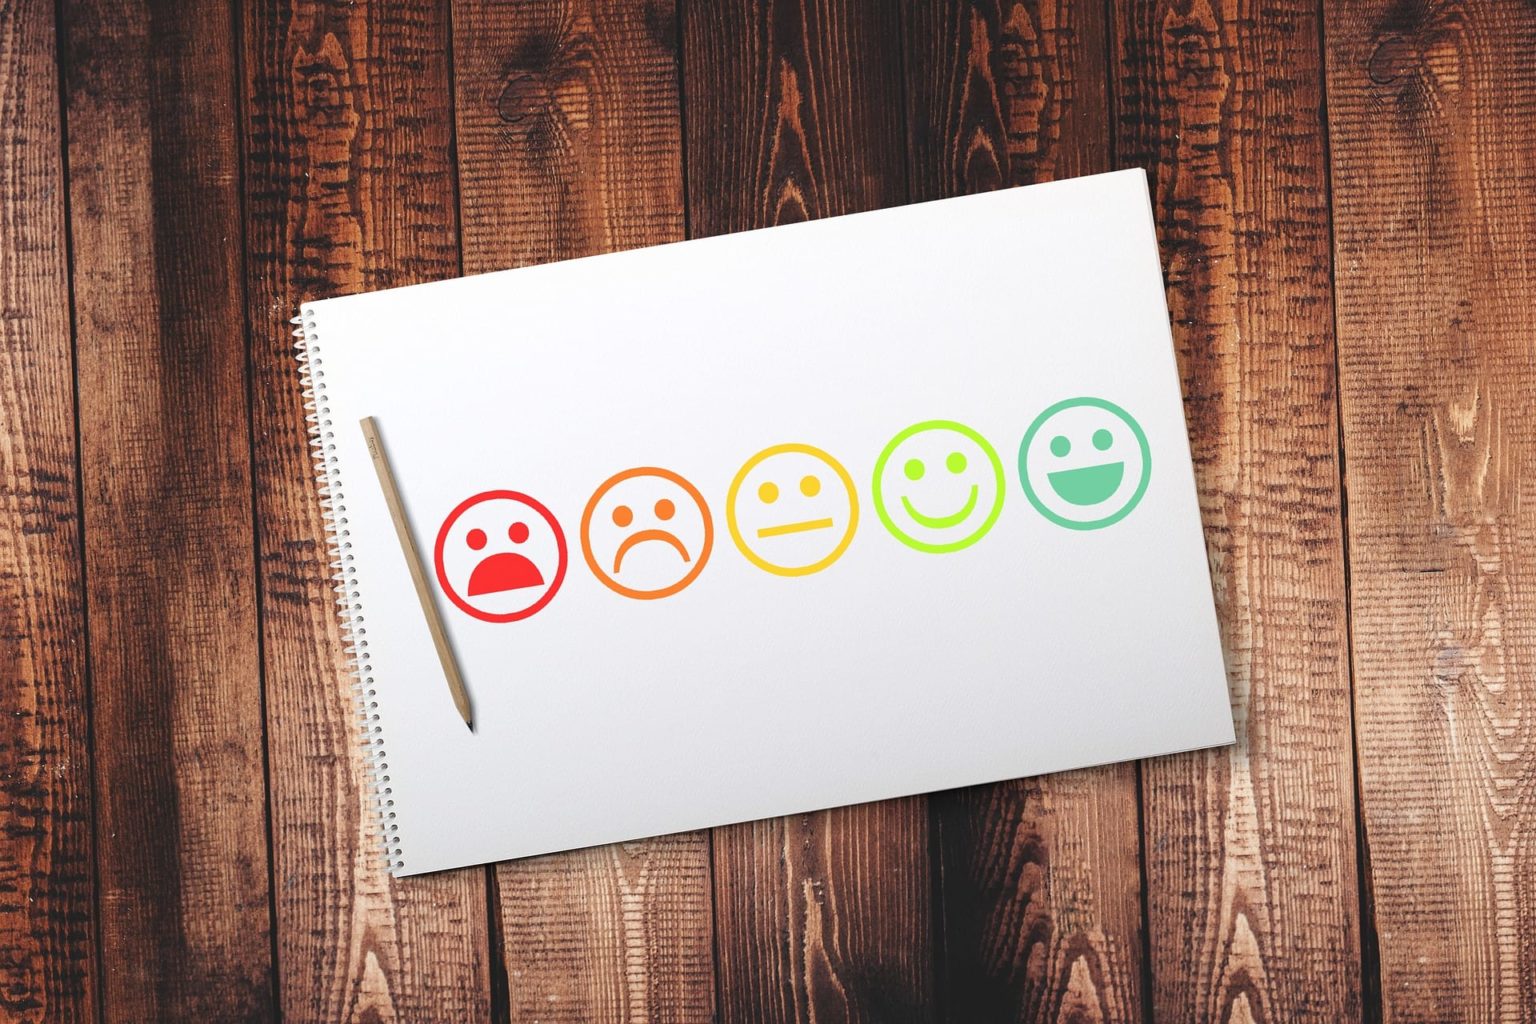 How to Give Feedback to a Graphic Designer